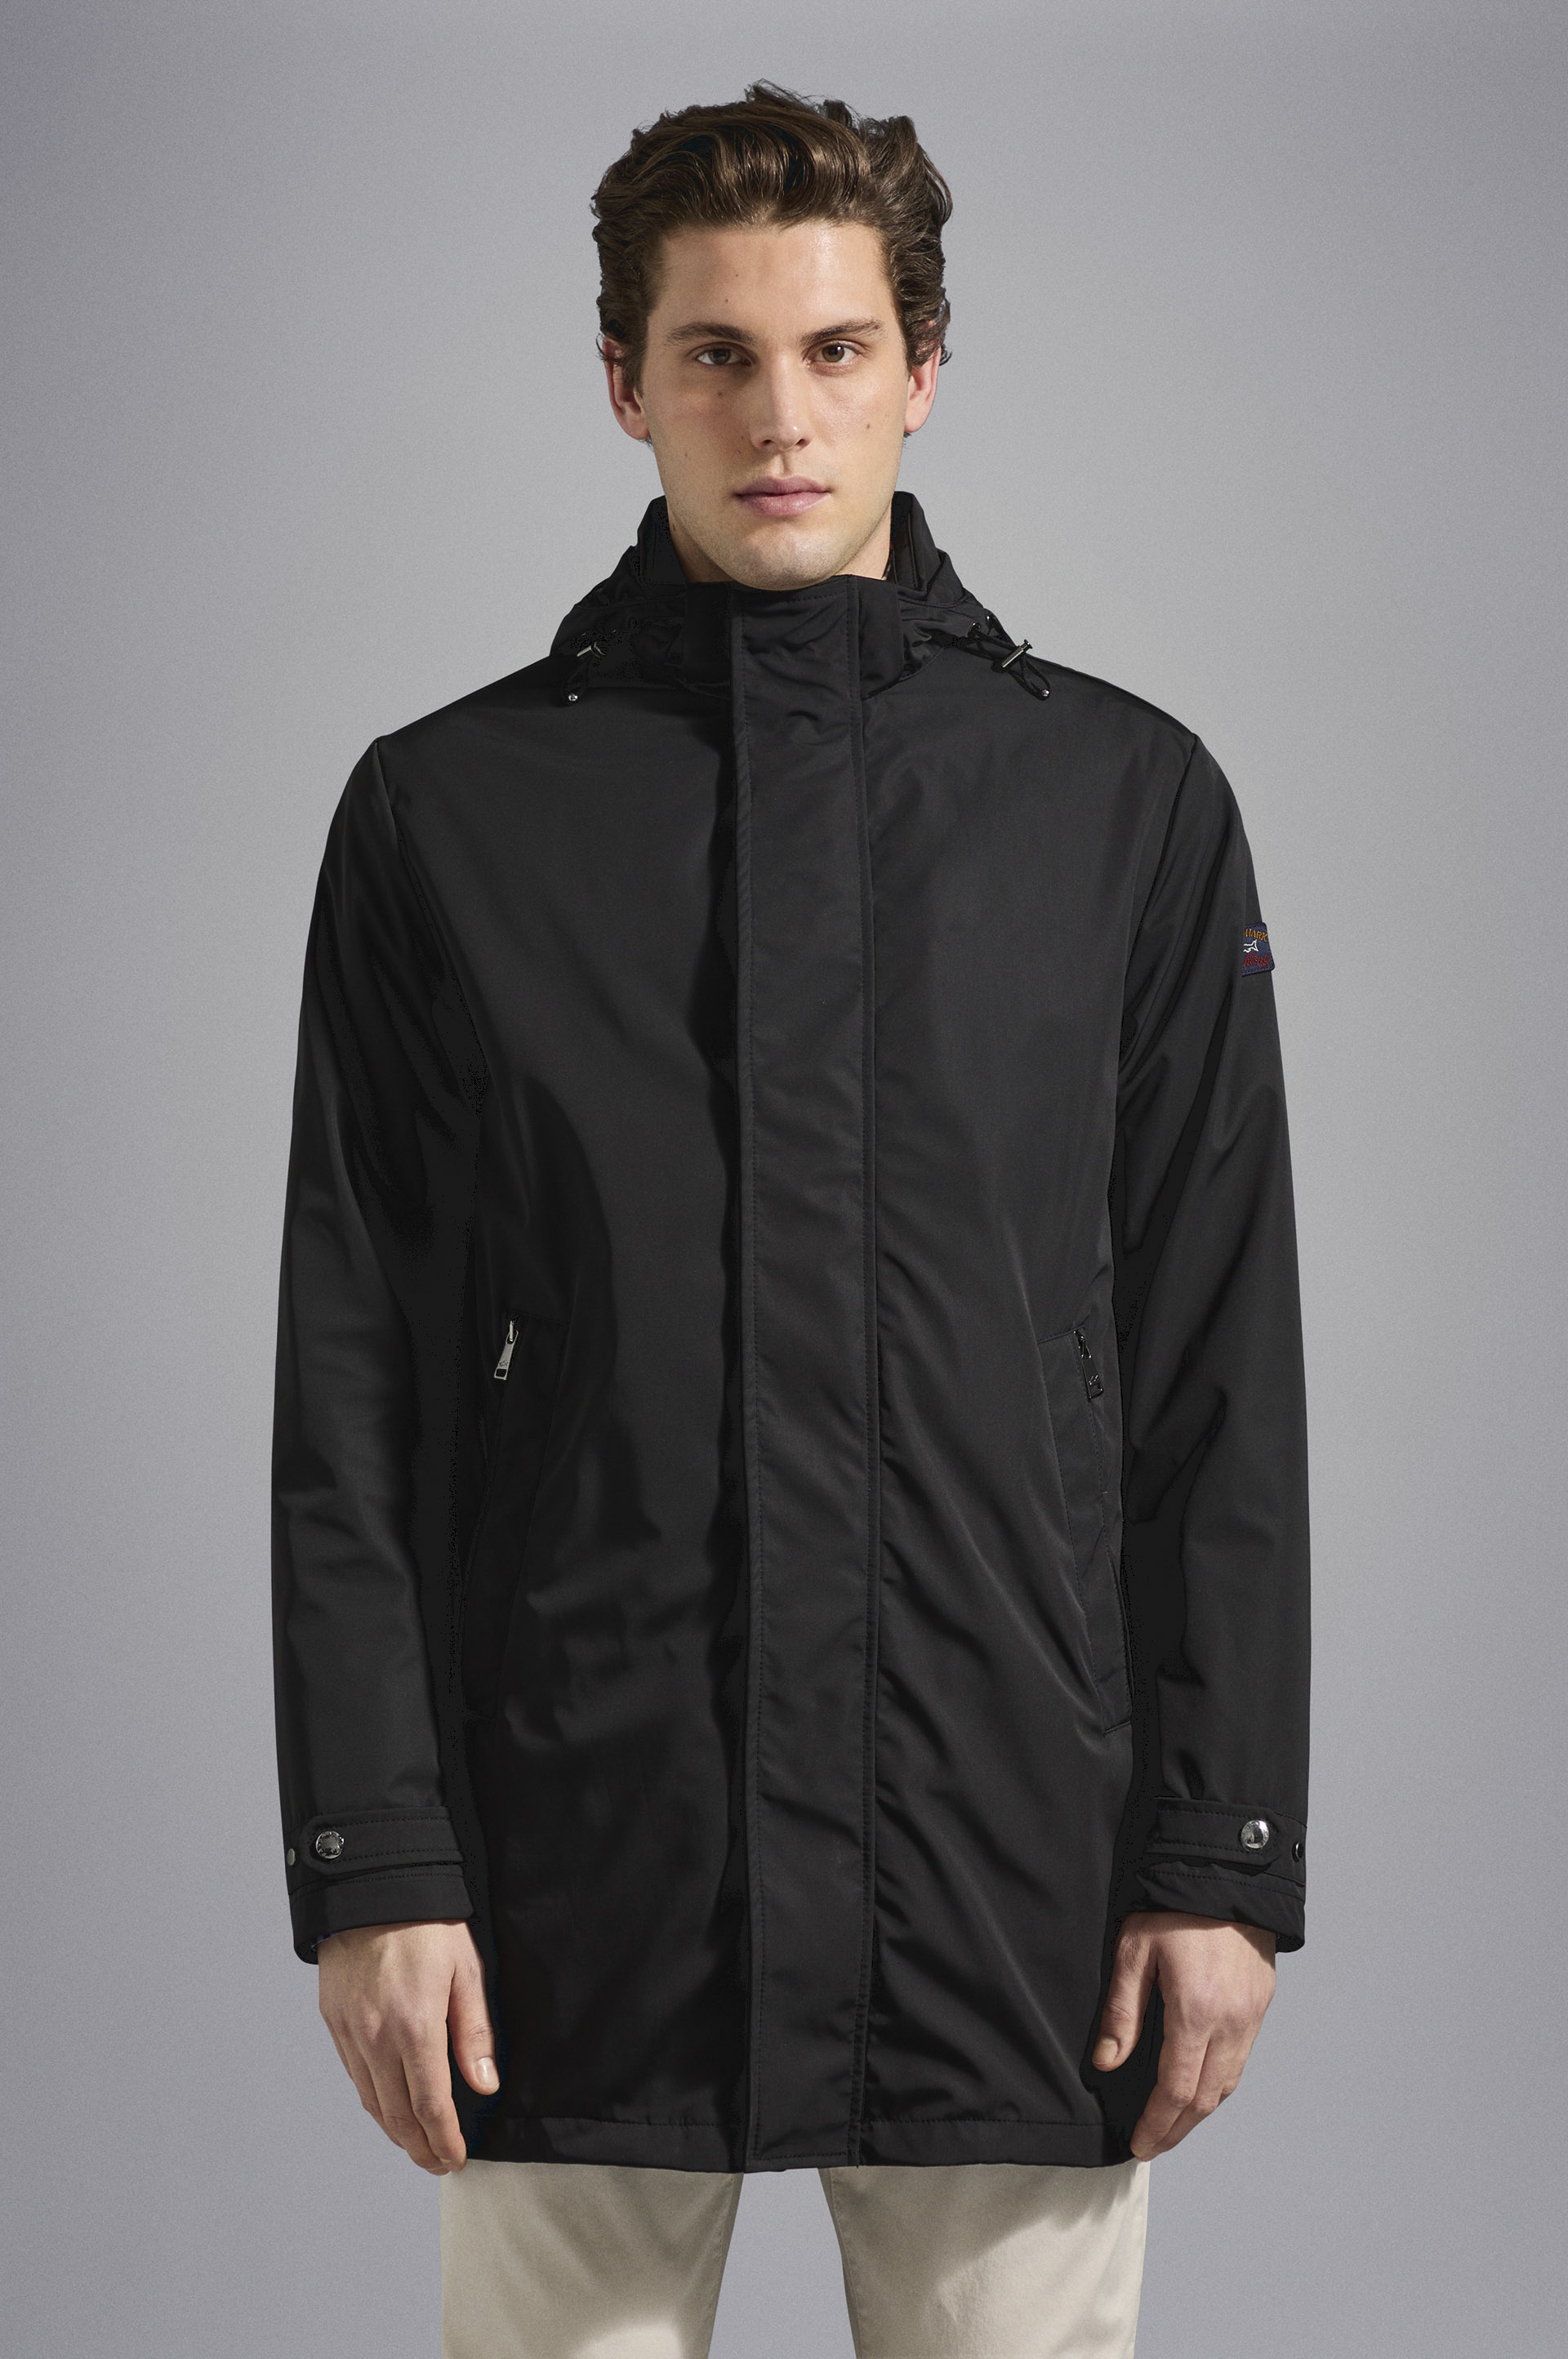 CARCOAT WITH DETACHABLE HOOD - 7